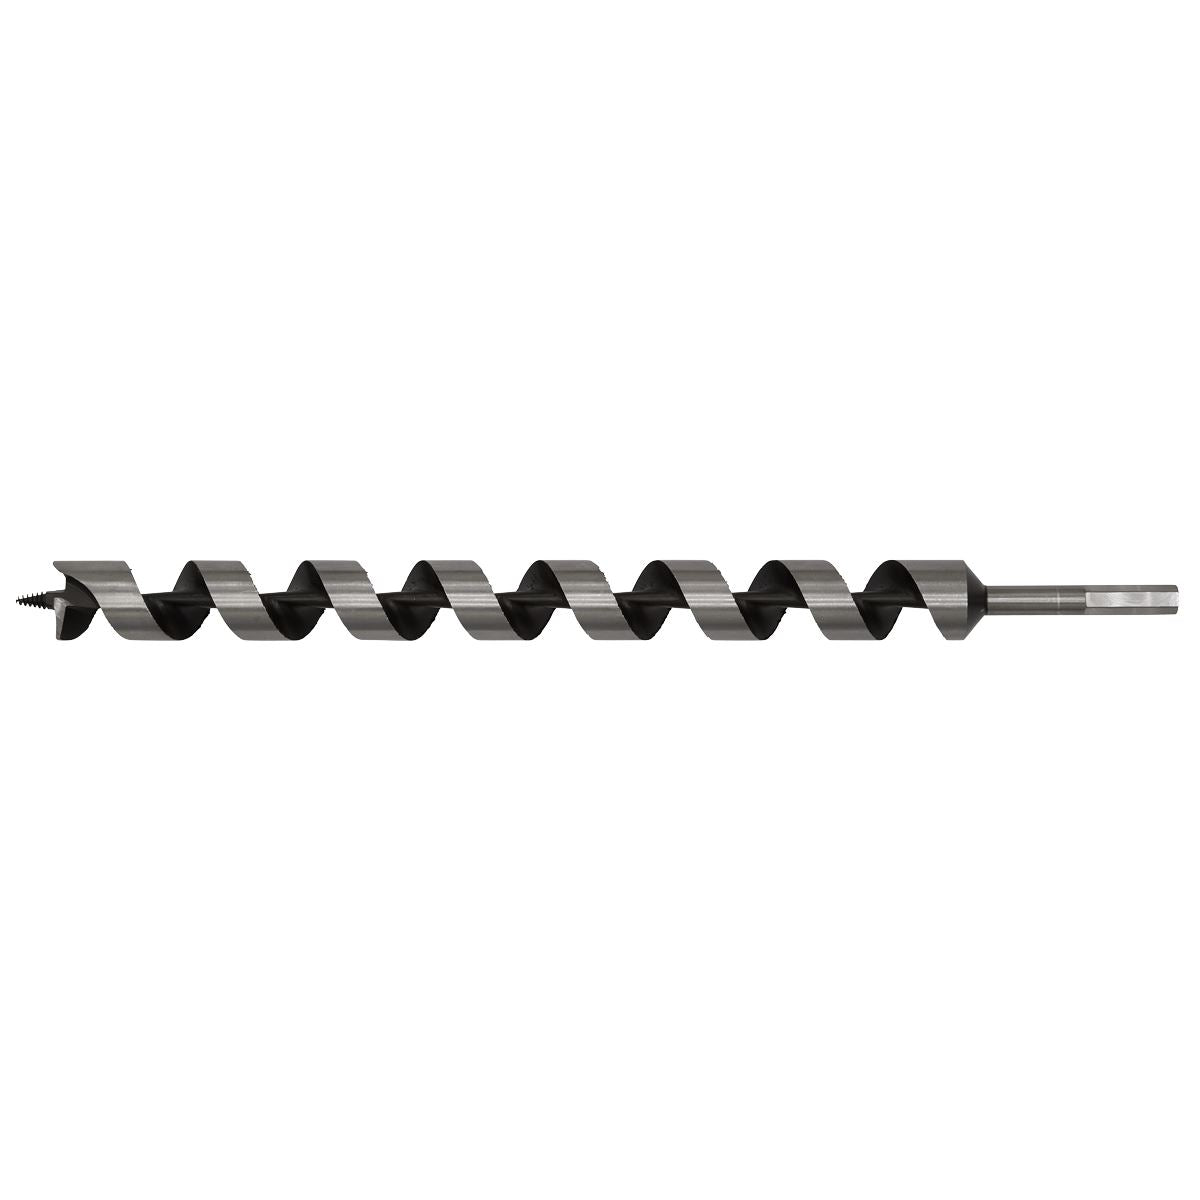 Worksafe by Sealey Auger Wood Drill Bit 32mm x 460mm